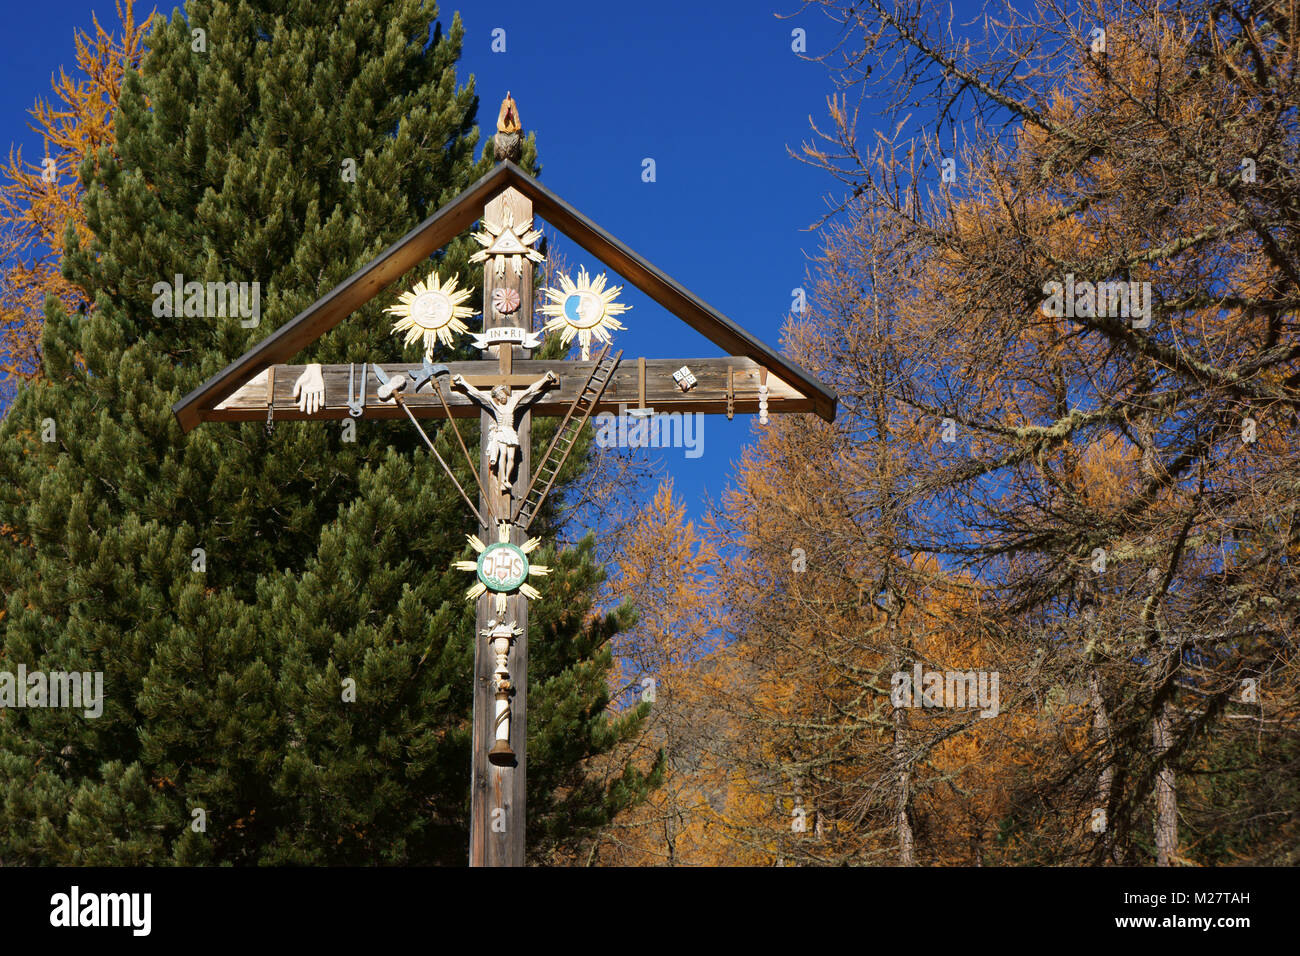 Cross with Jesus figure and torture tools decorated, Saas grund, Valais alps, Switzerland Stock Photo